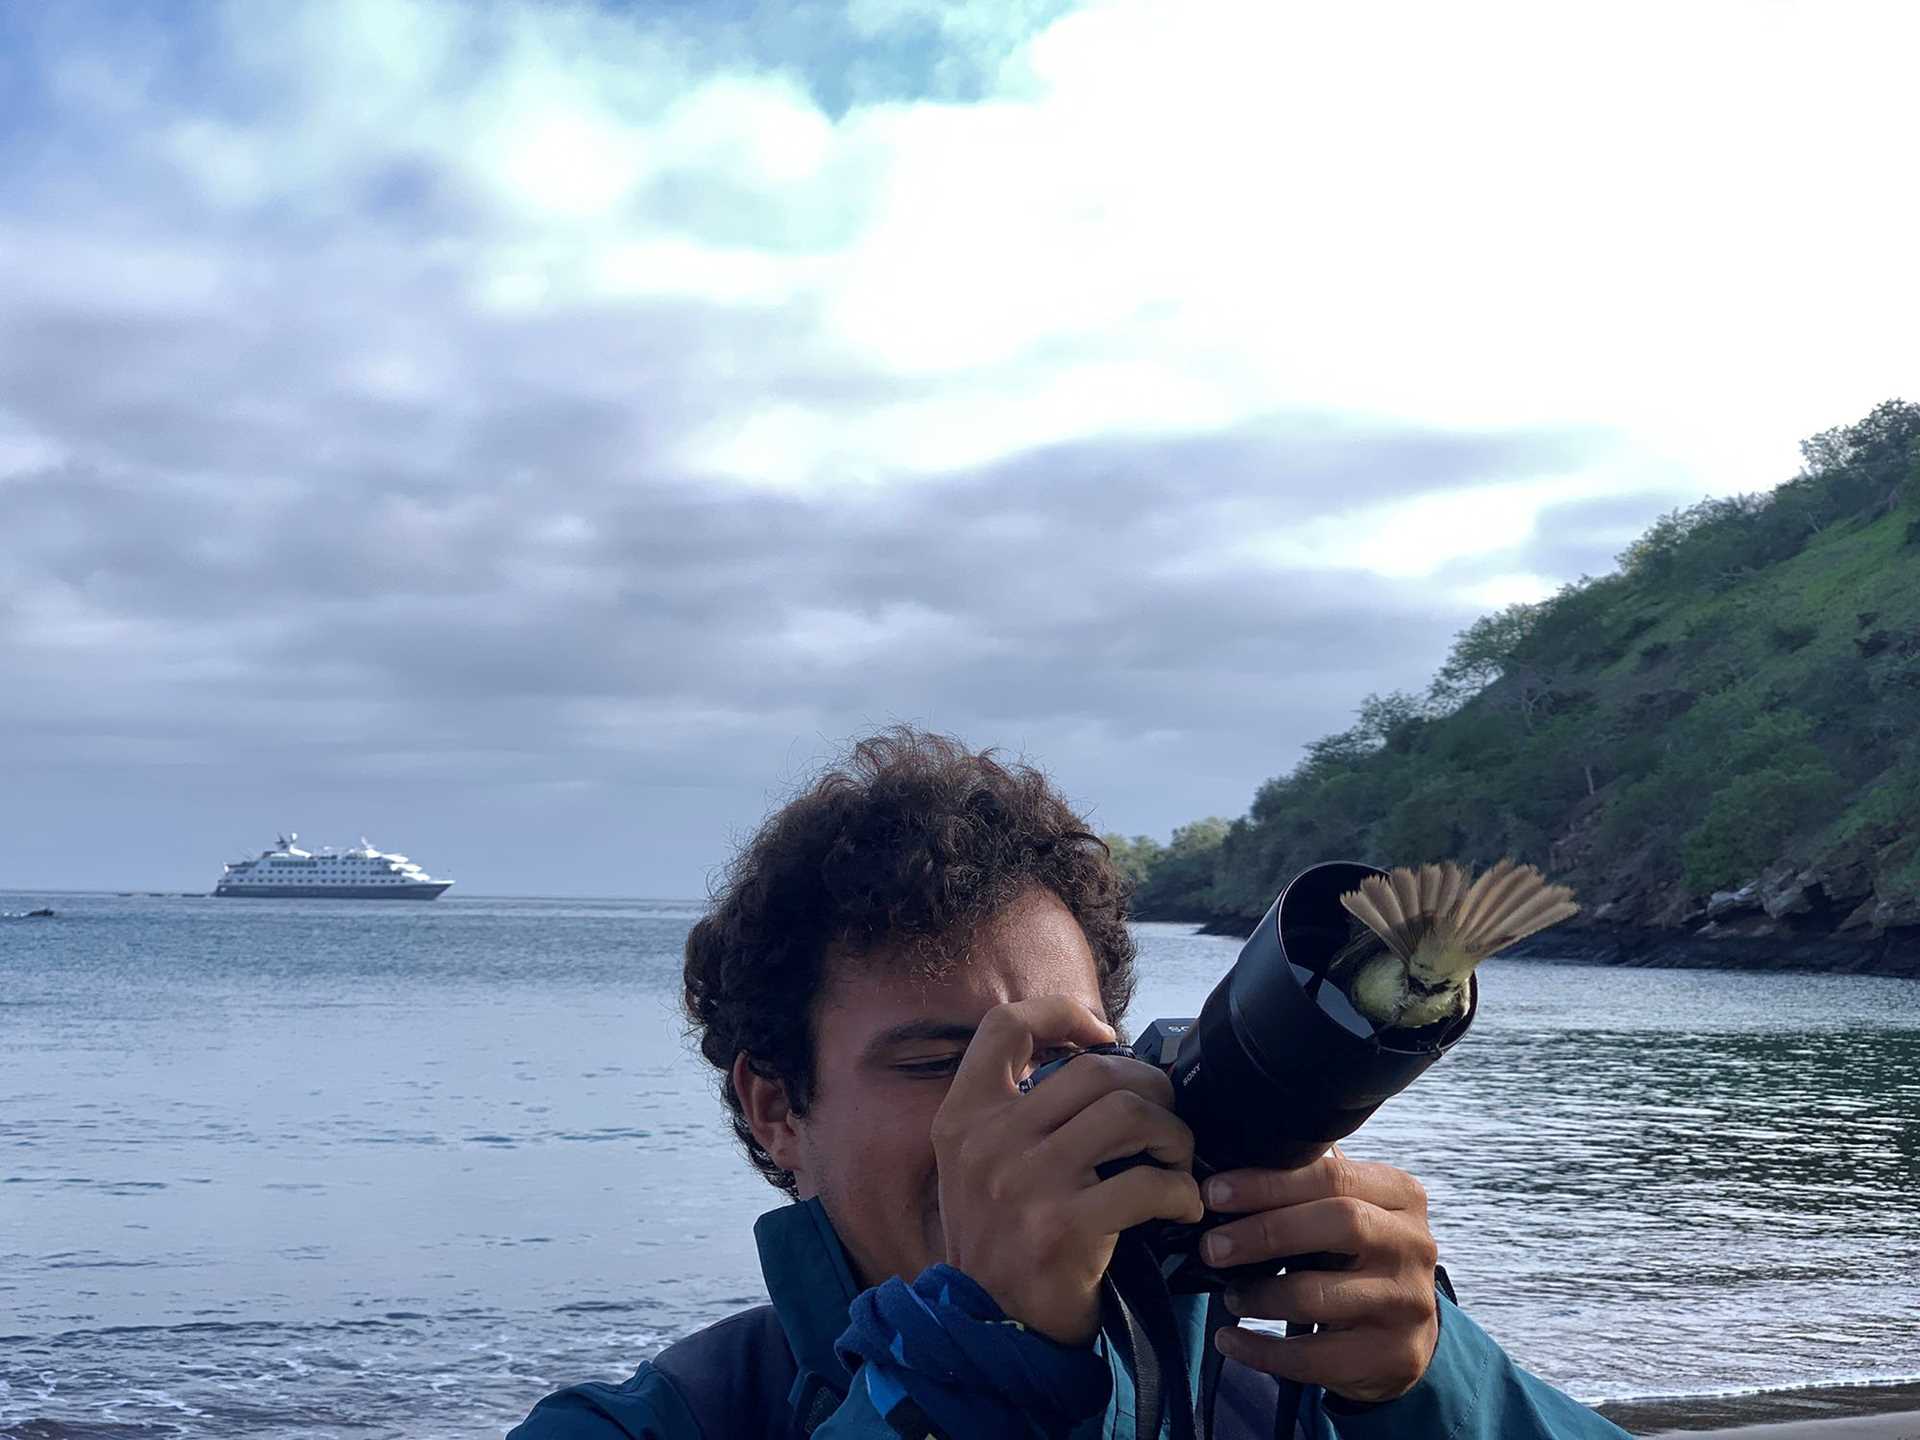 a man holds a camera while a bird attempts to climb inside the lens